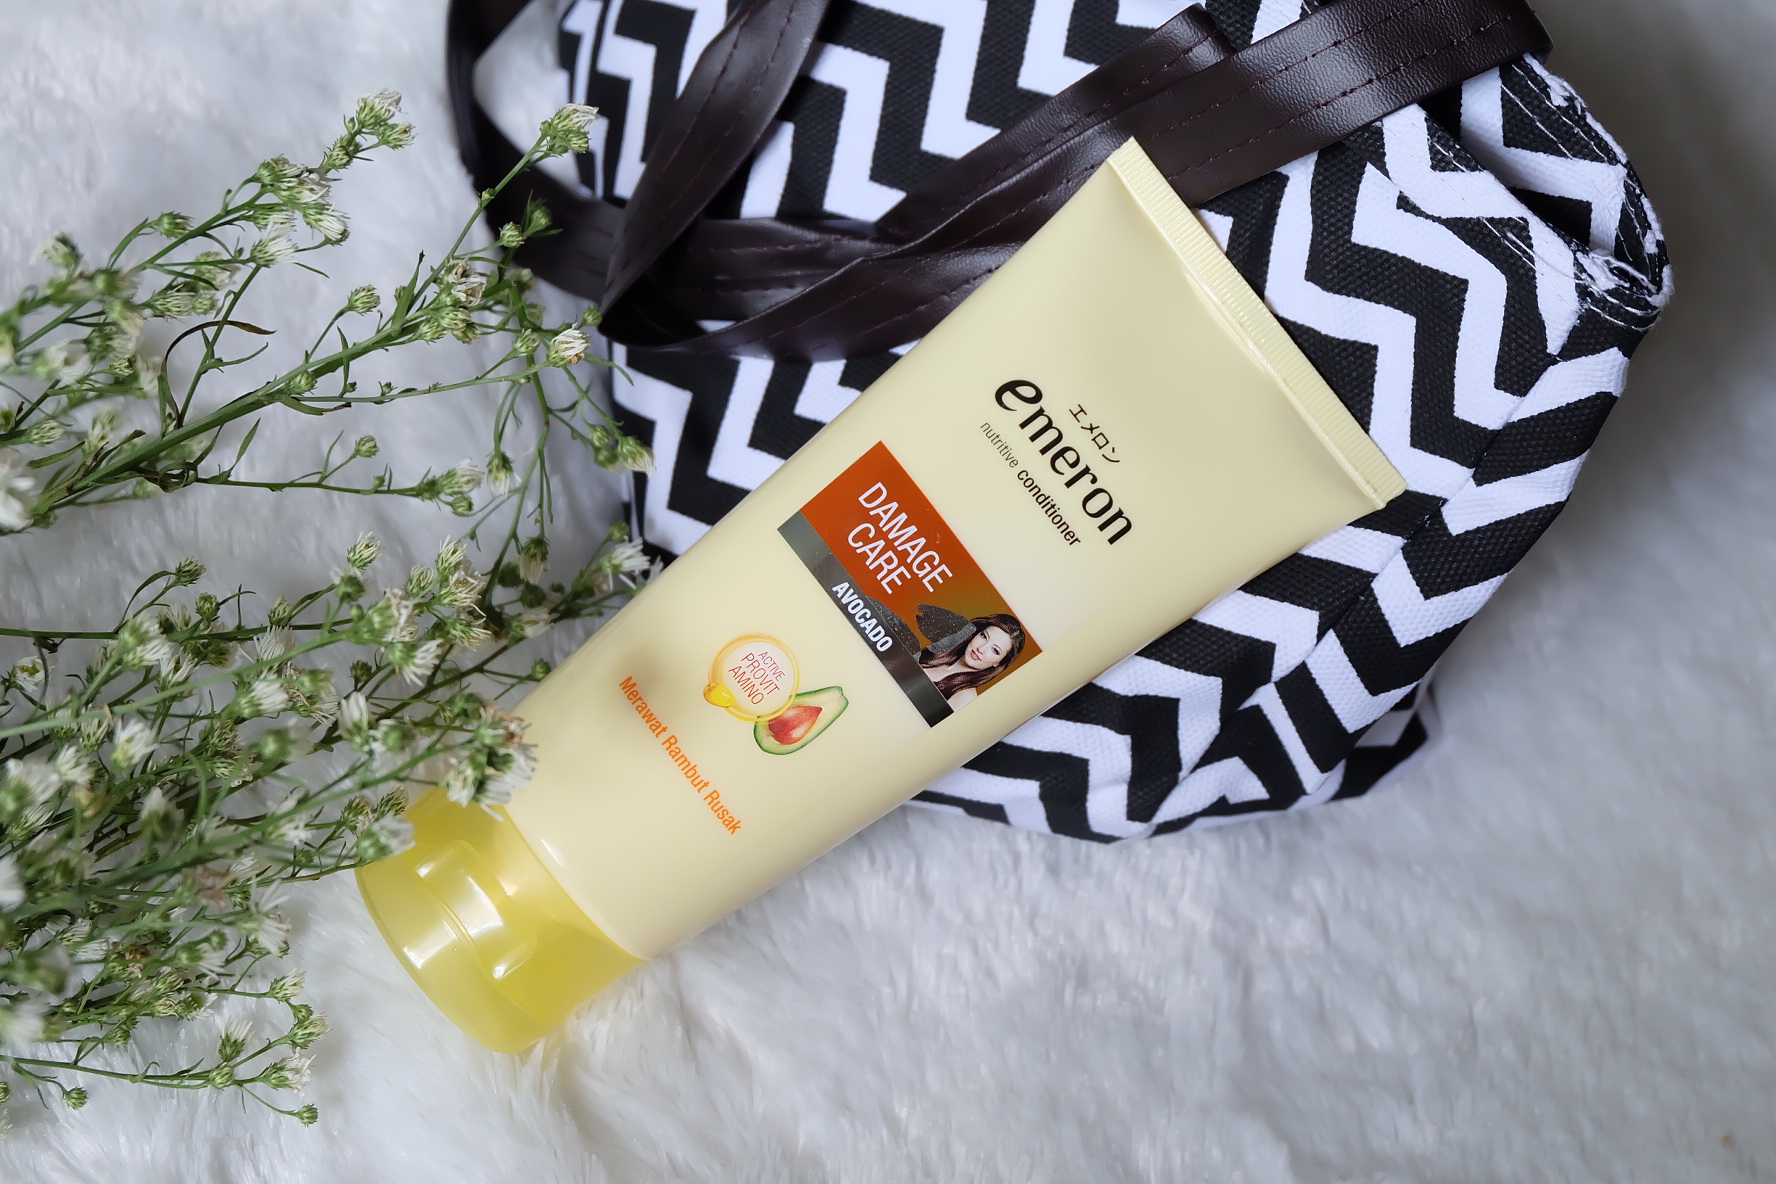 [Review] Emeron Complete Hair Damage Care (Shampoo, Hair Vitamin and Conditioner)